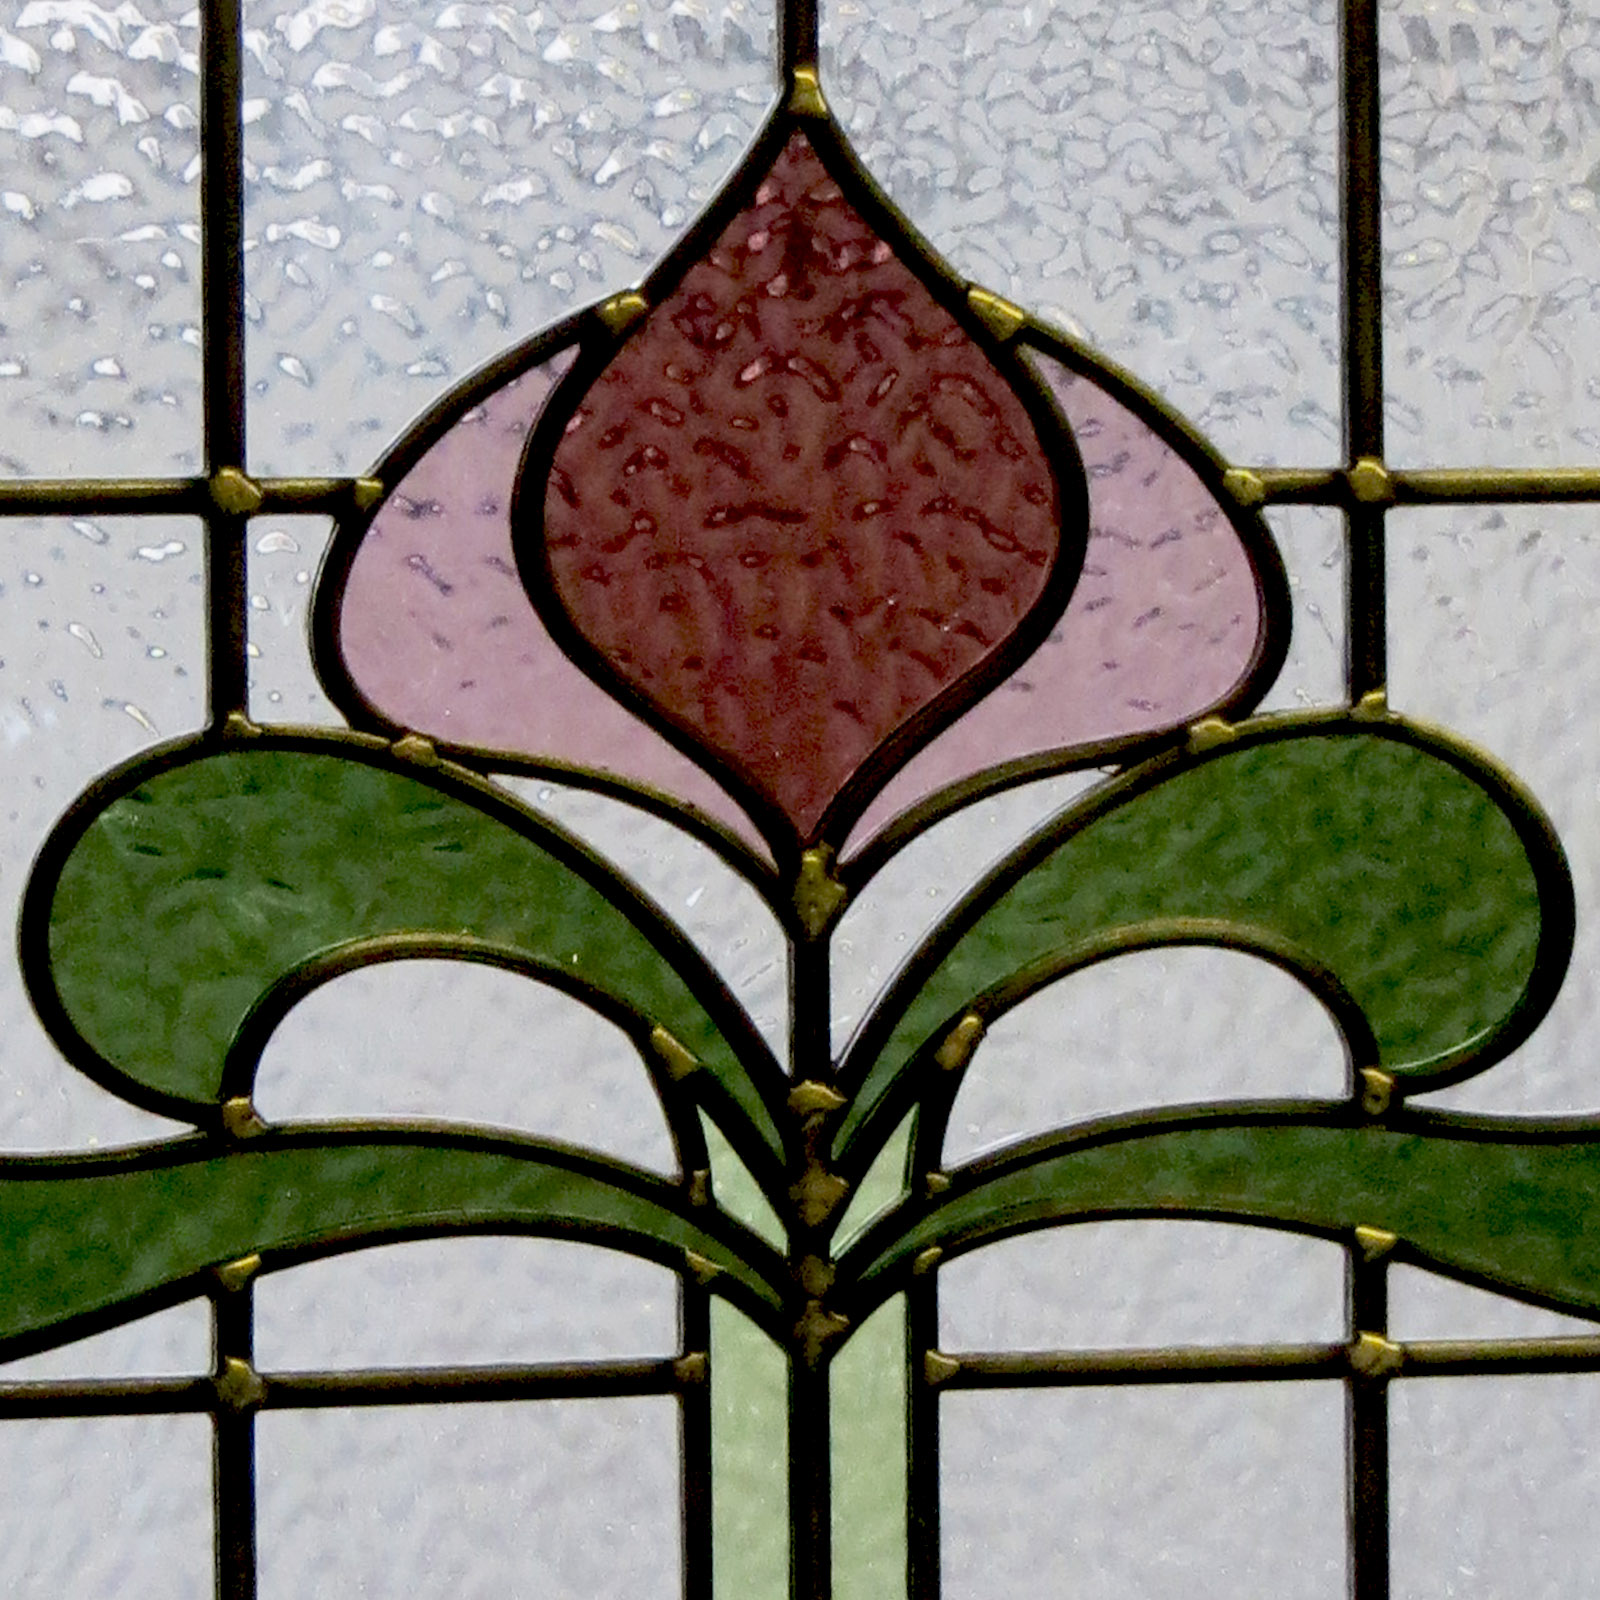 1930s Art Nouveau Stained Glass Panel